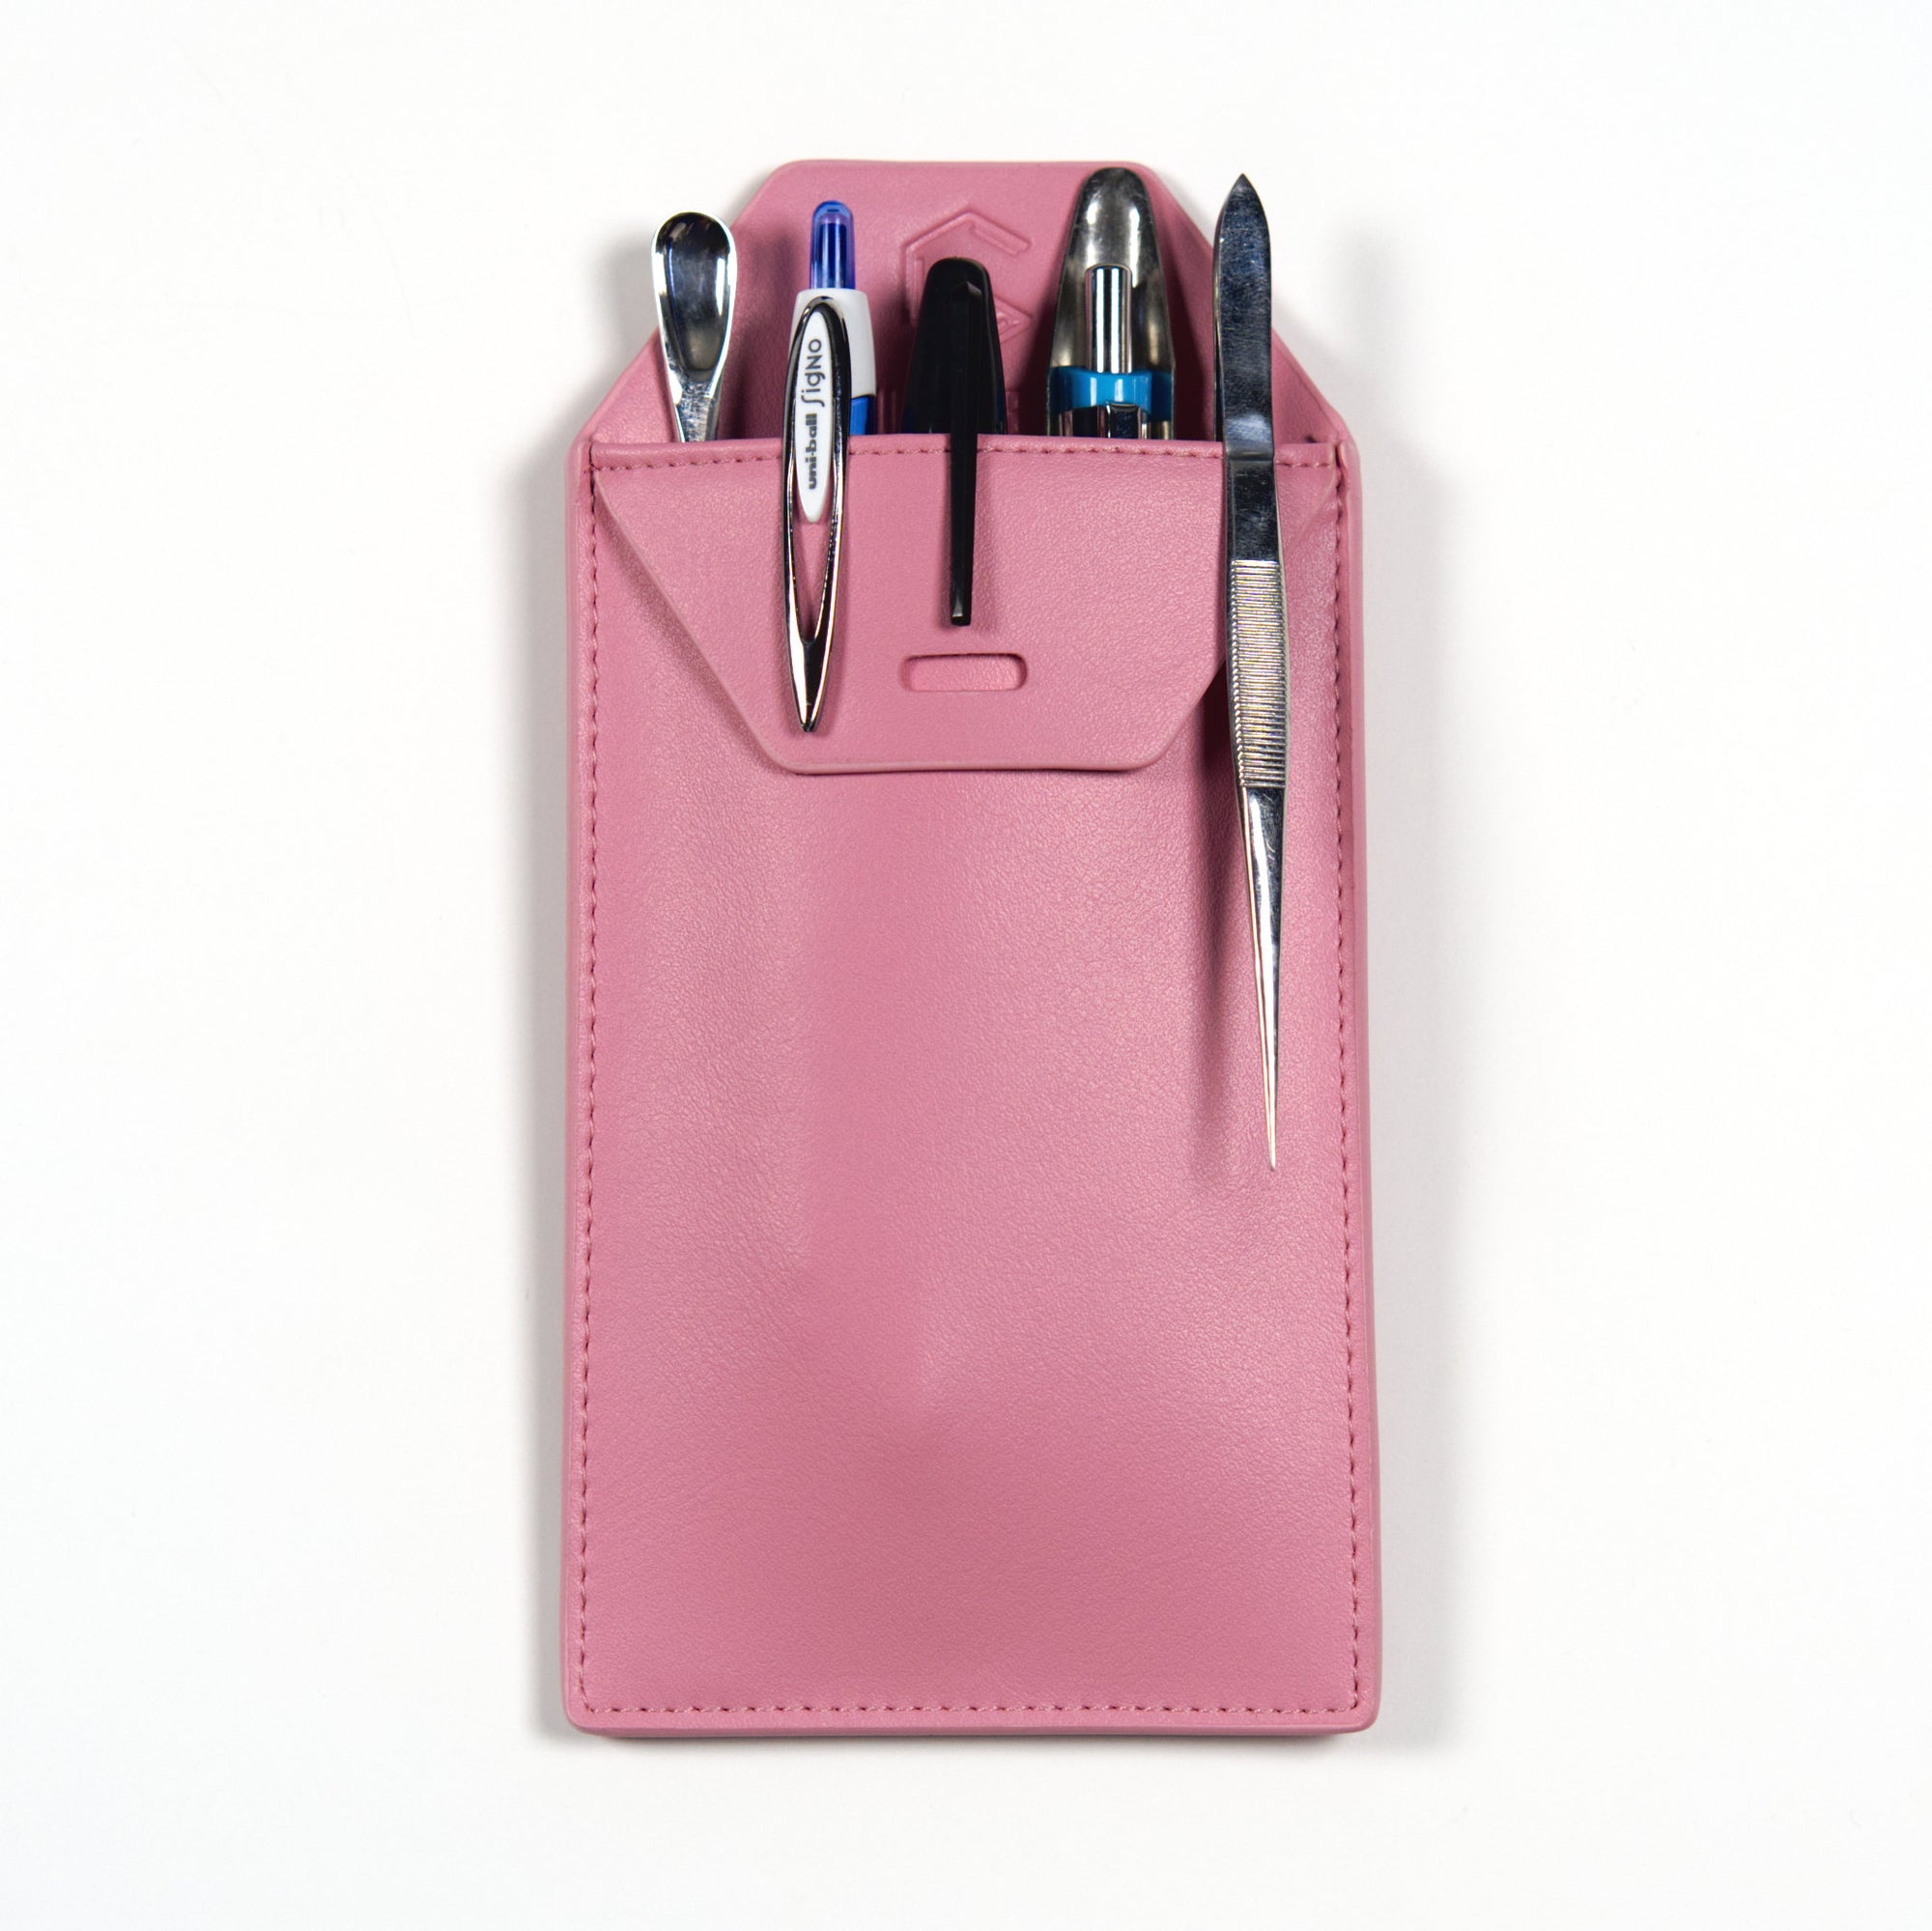 pink pocket protector for women in science and engineering